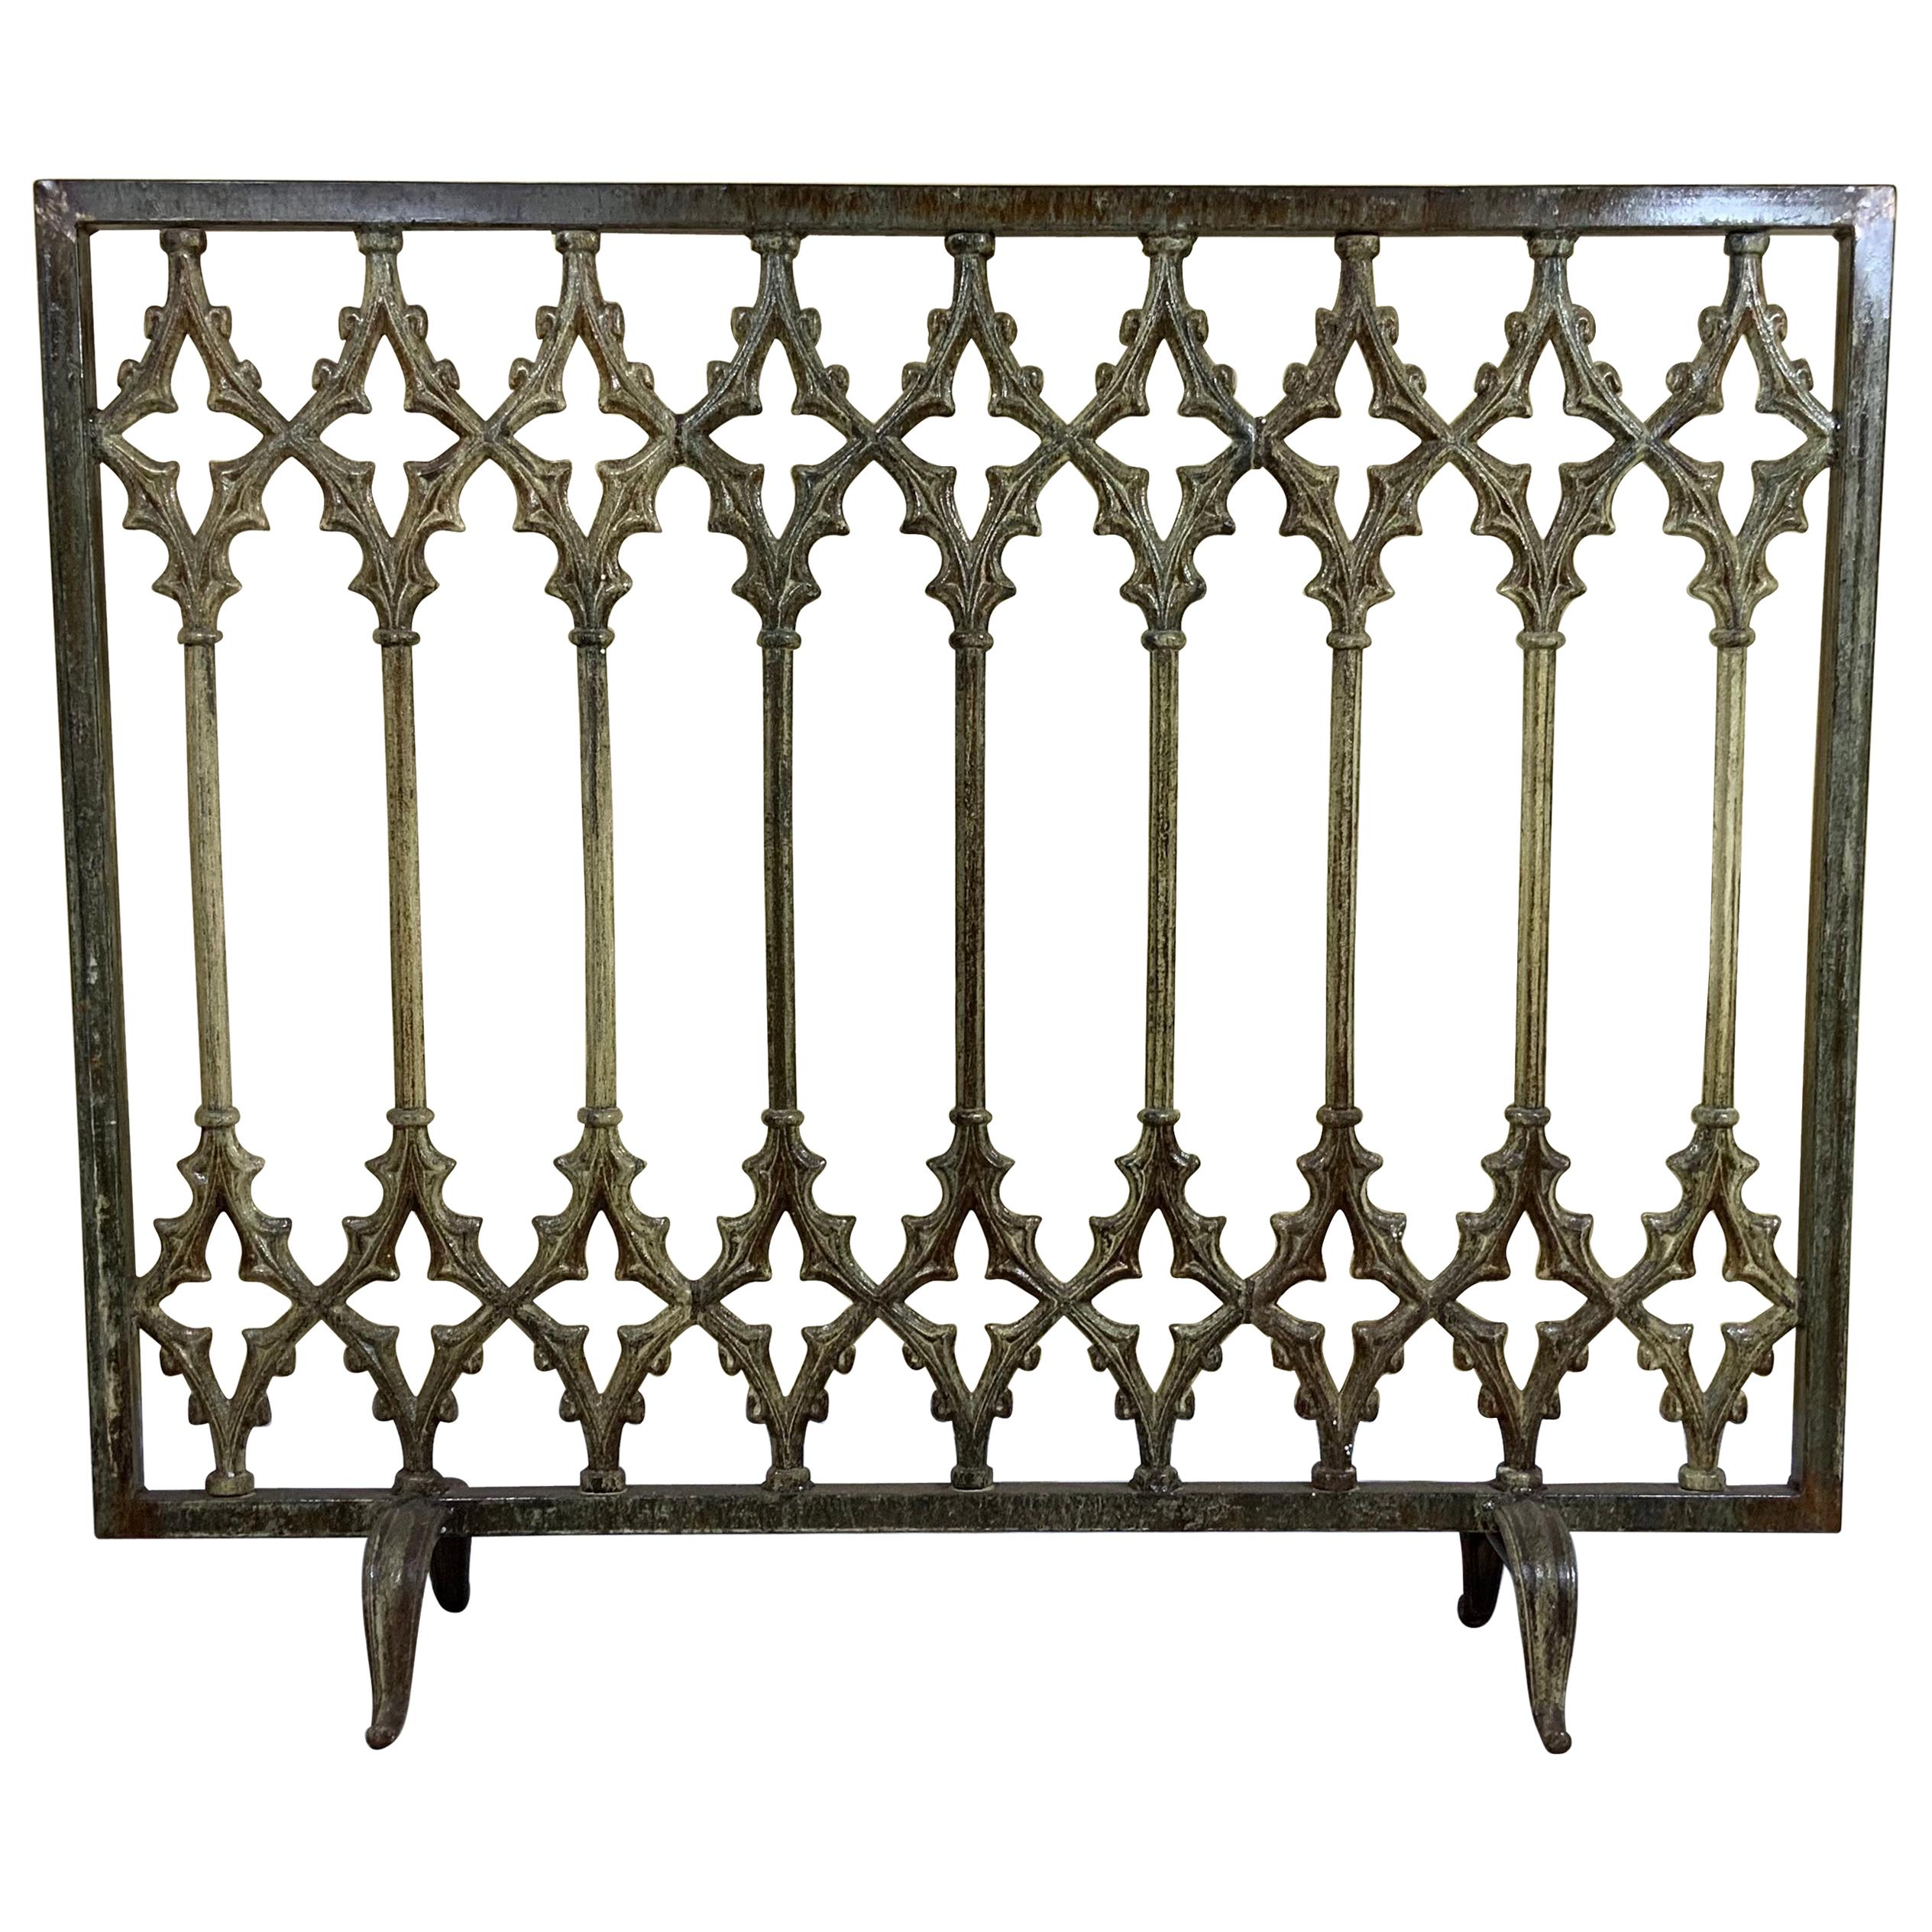 Large Cast Iron Fireplaces Screen